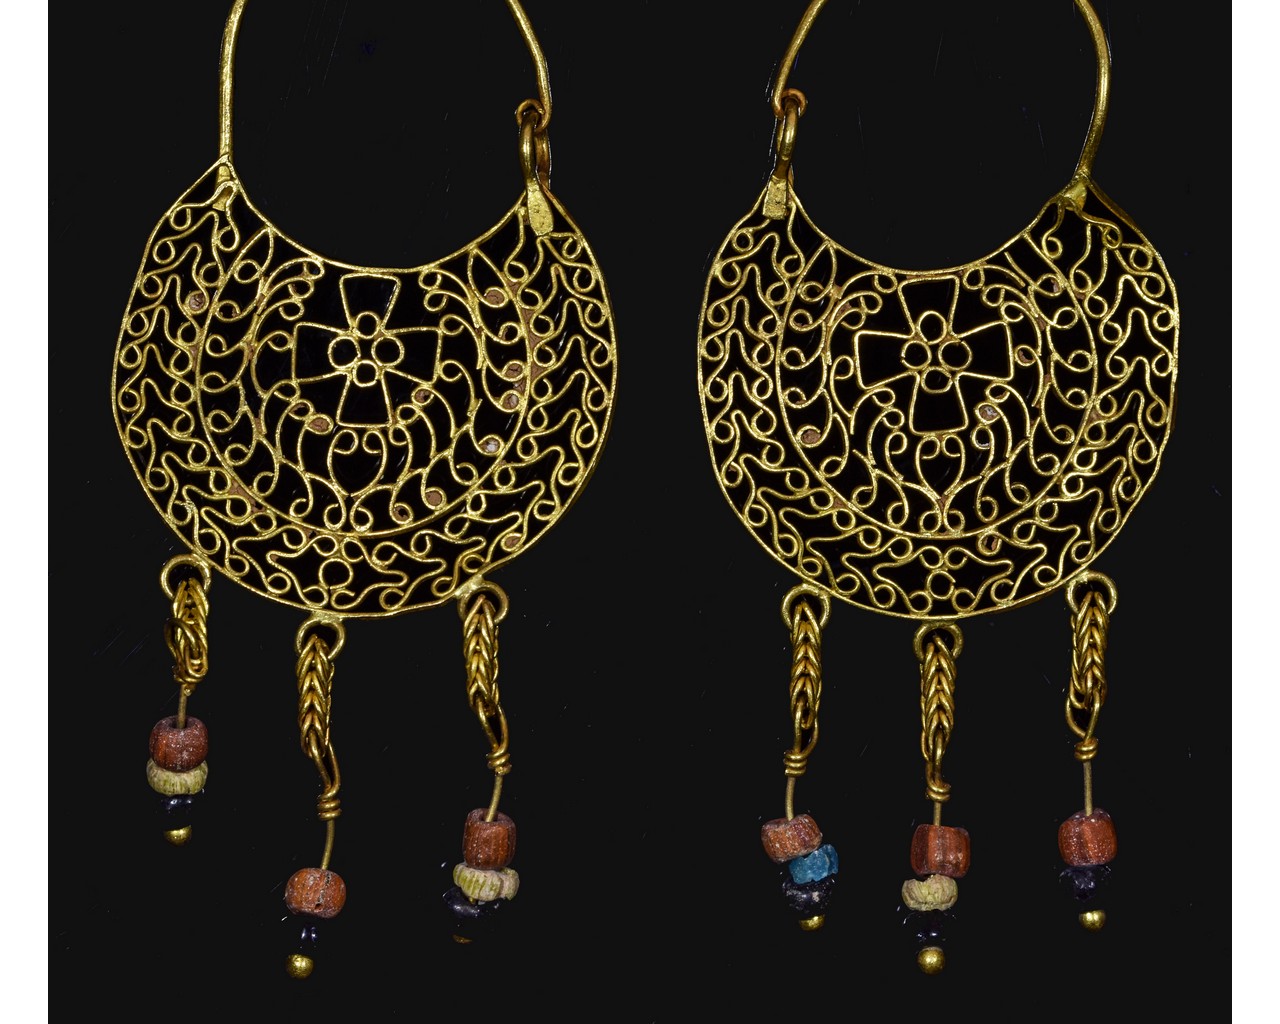 BYZANTINE GOLD EARRINGS WITH CROSSES AND BEADS - Image 2 of 3